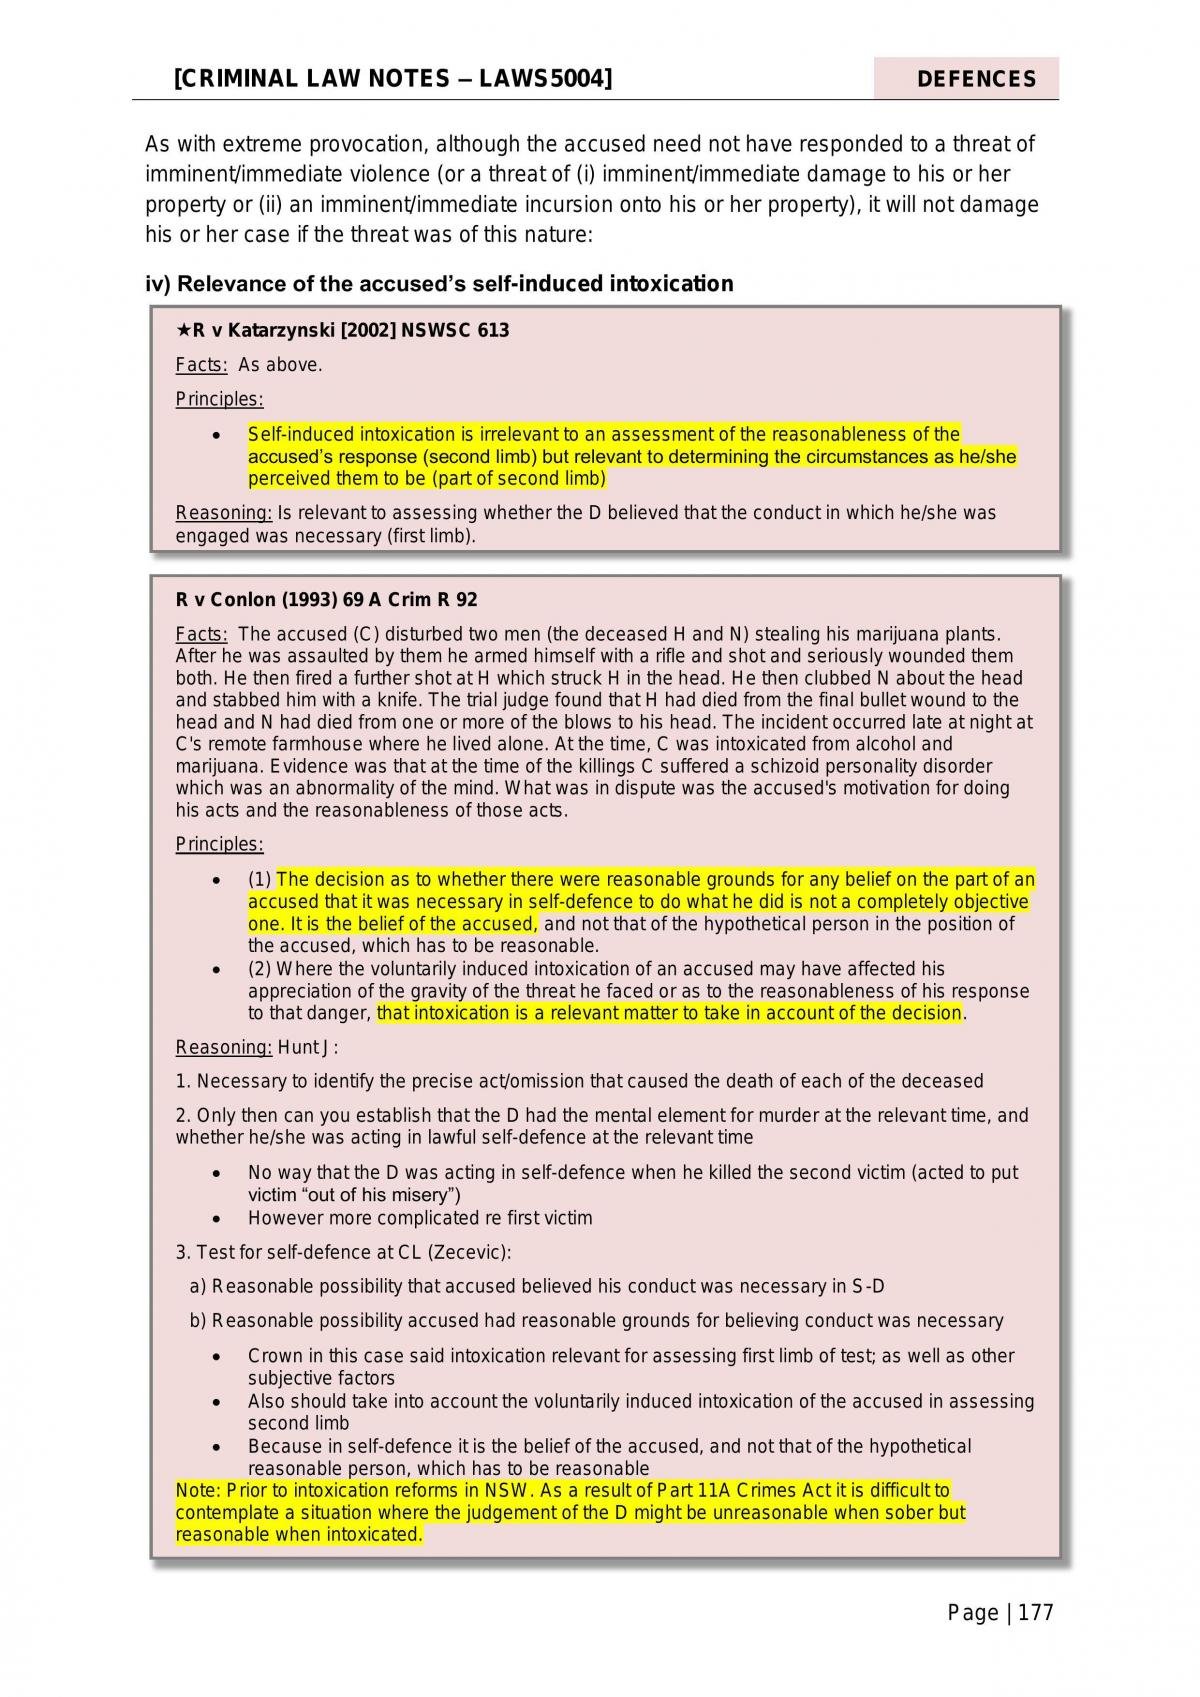 LAWS1016 Criminal Law Notes and Analysis for Final Exam - Page 195